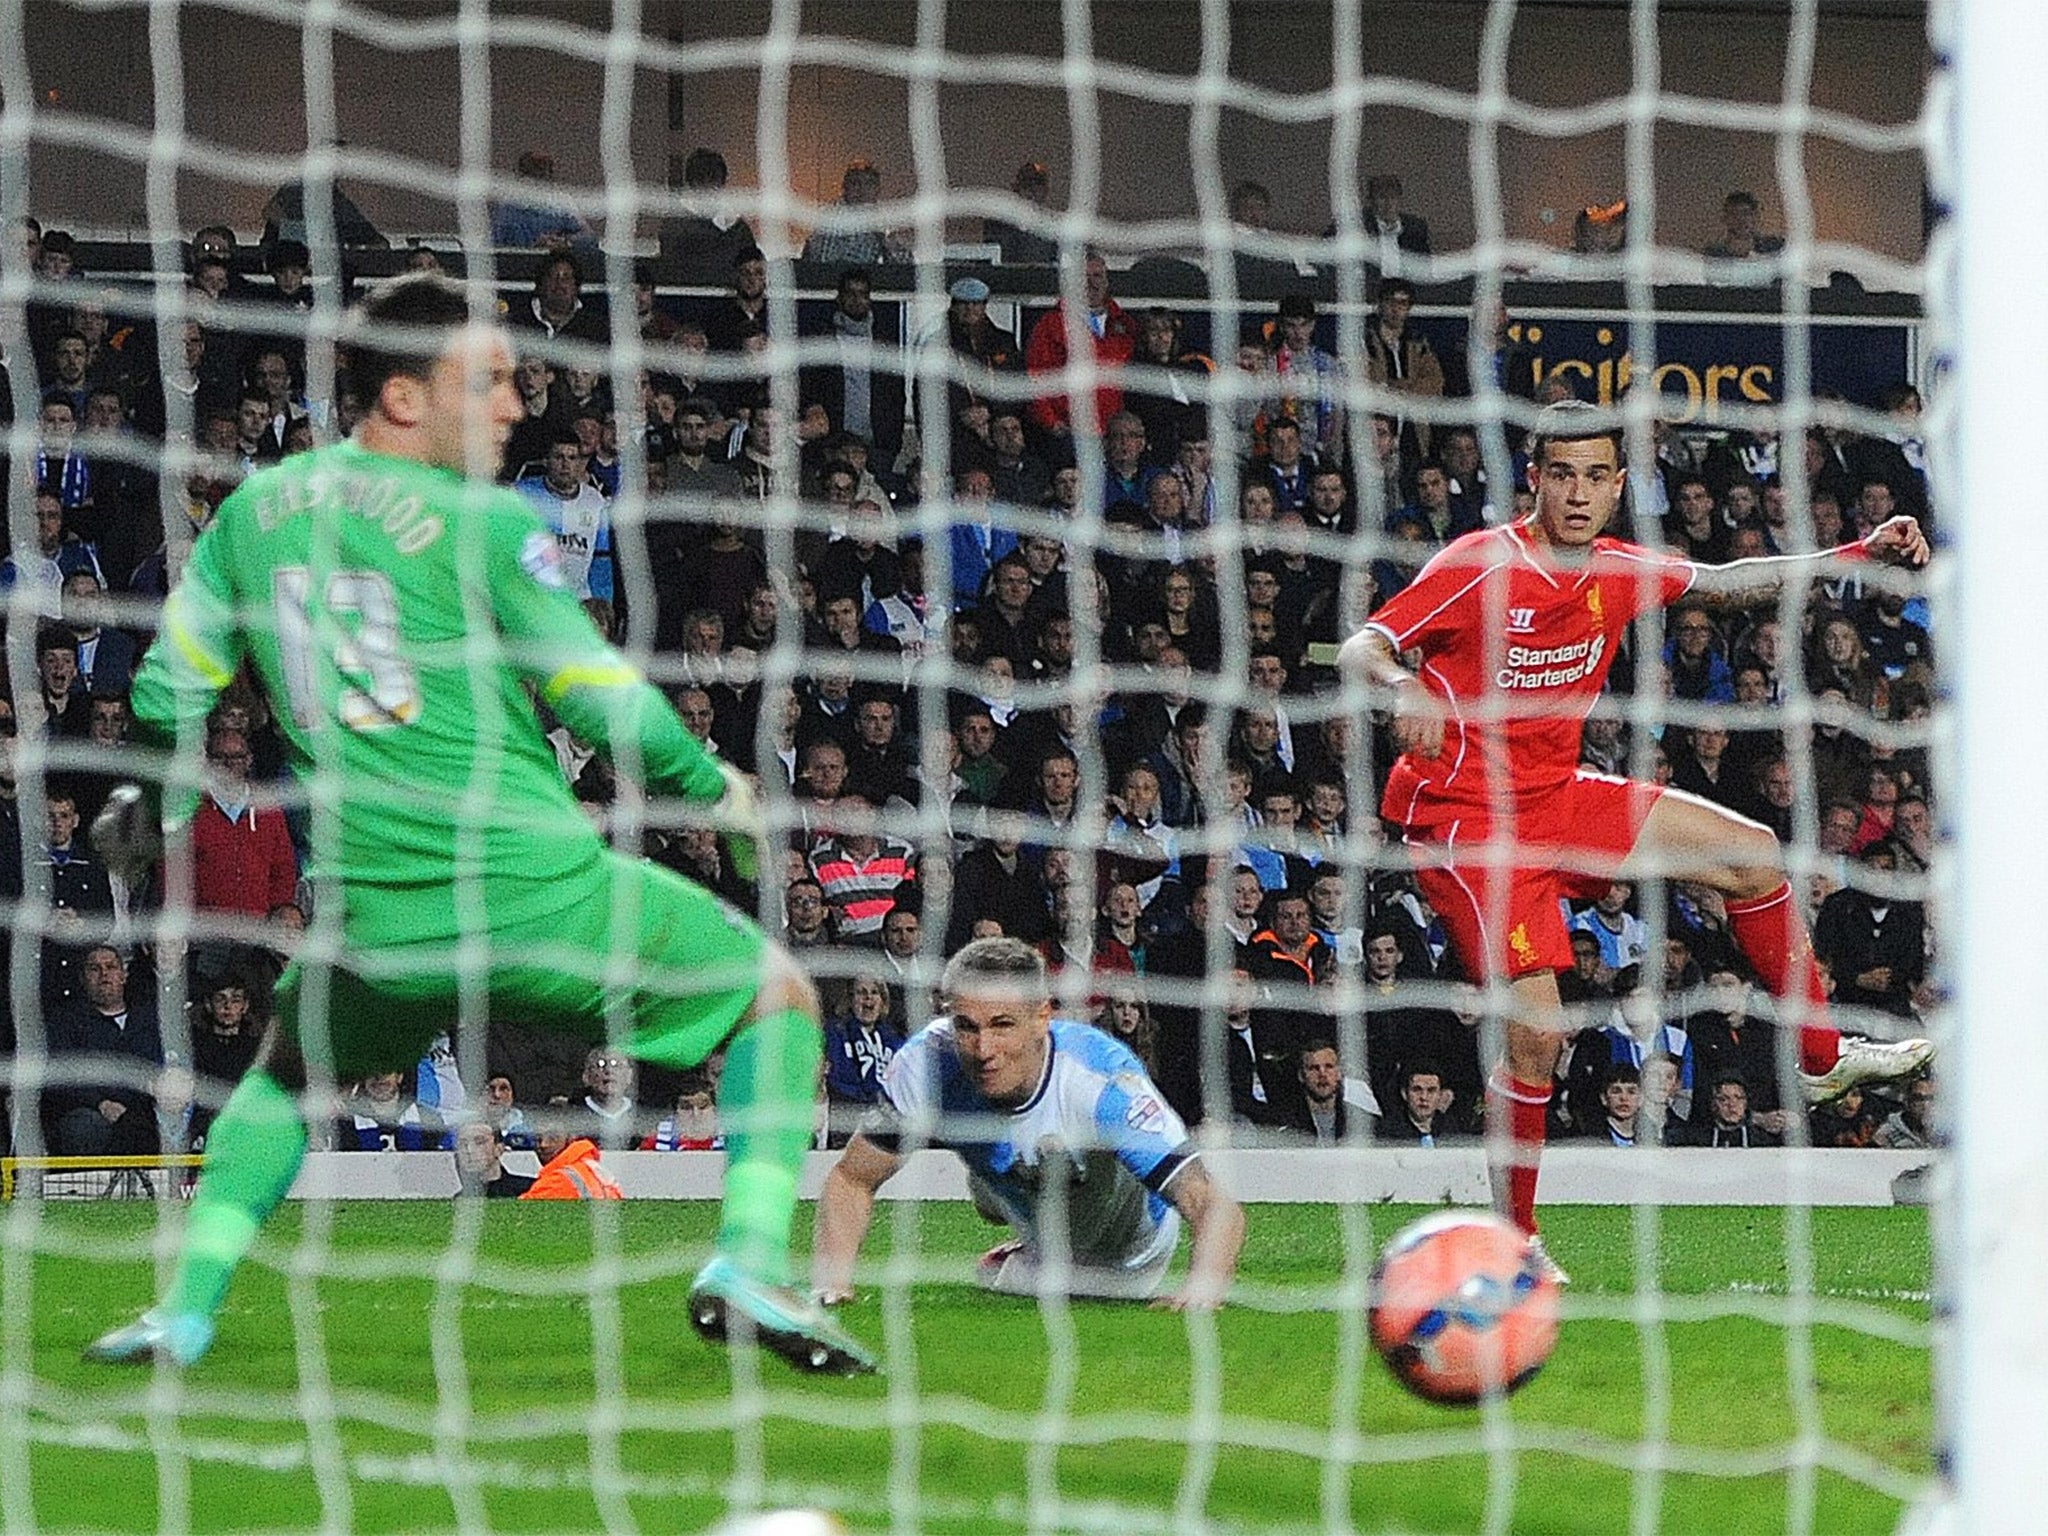 Philippe Coutinho finds the bottom corner to book Liverpool's place in the semis